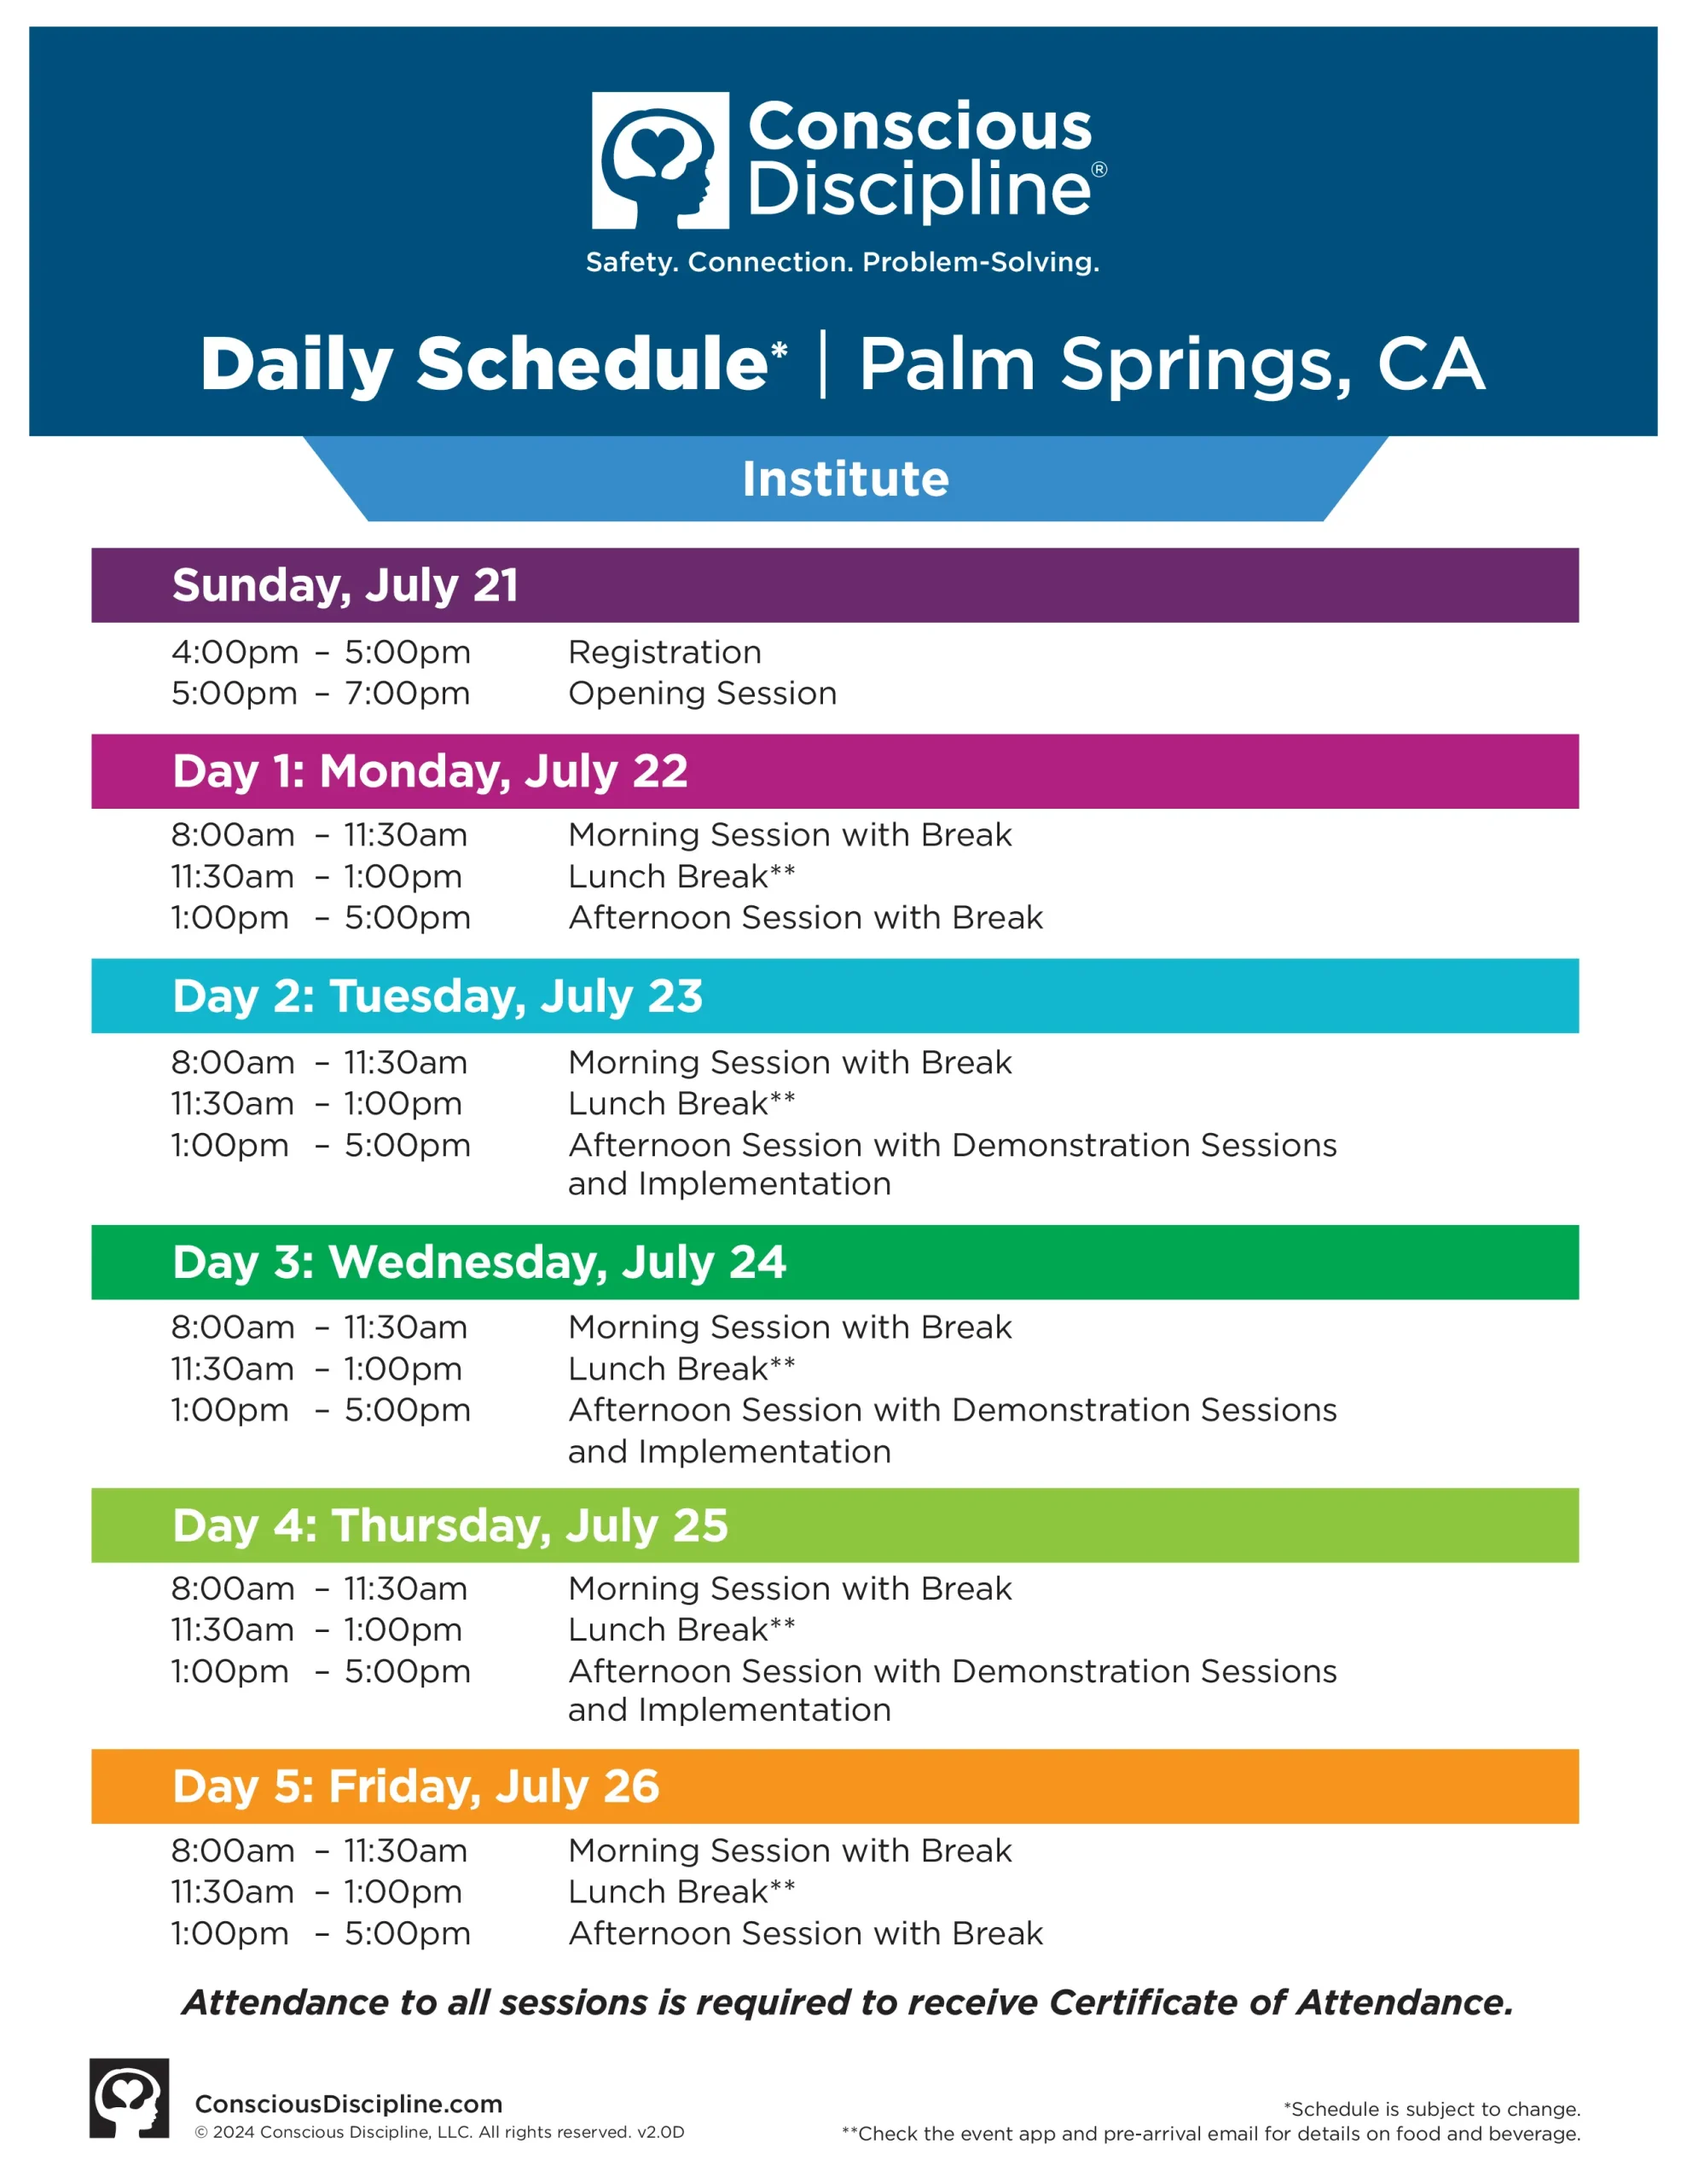 palm springs event schedule